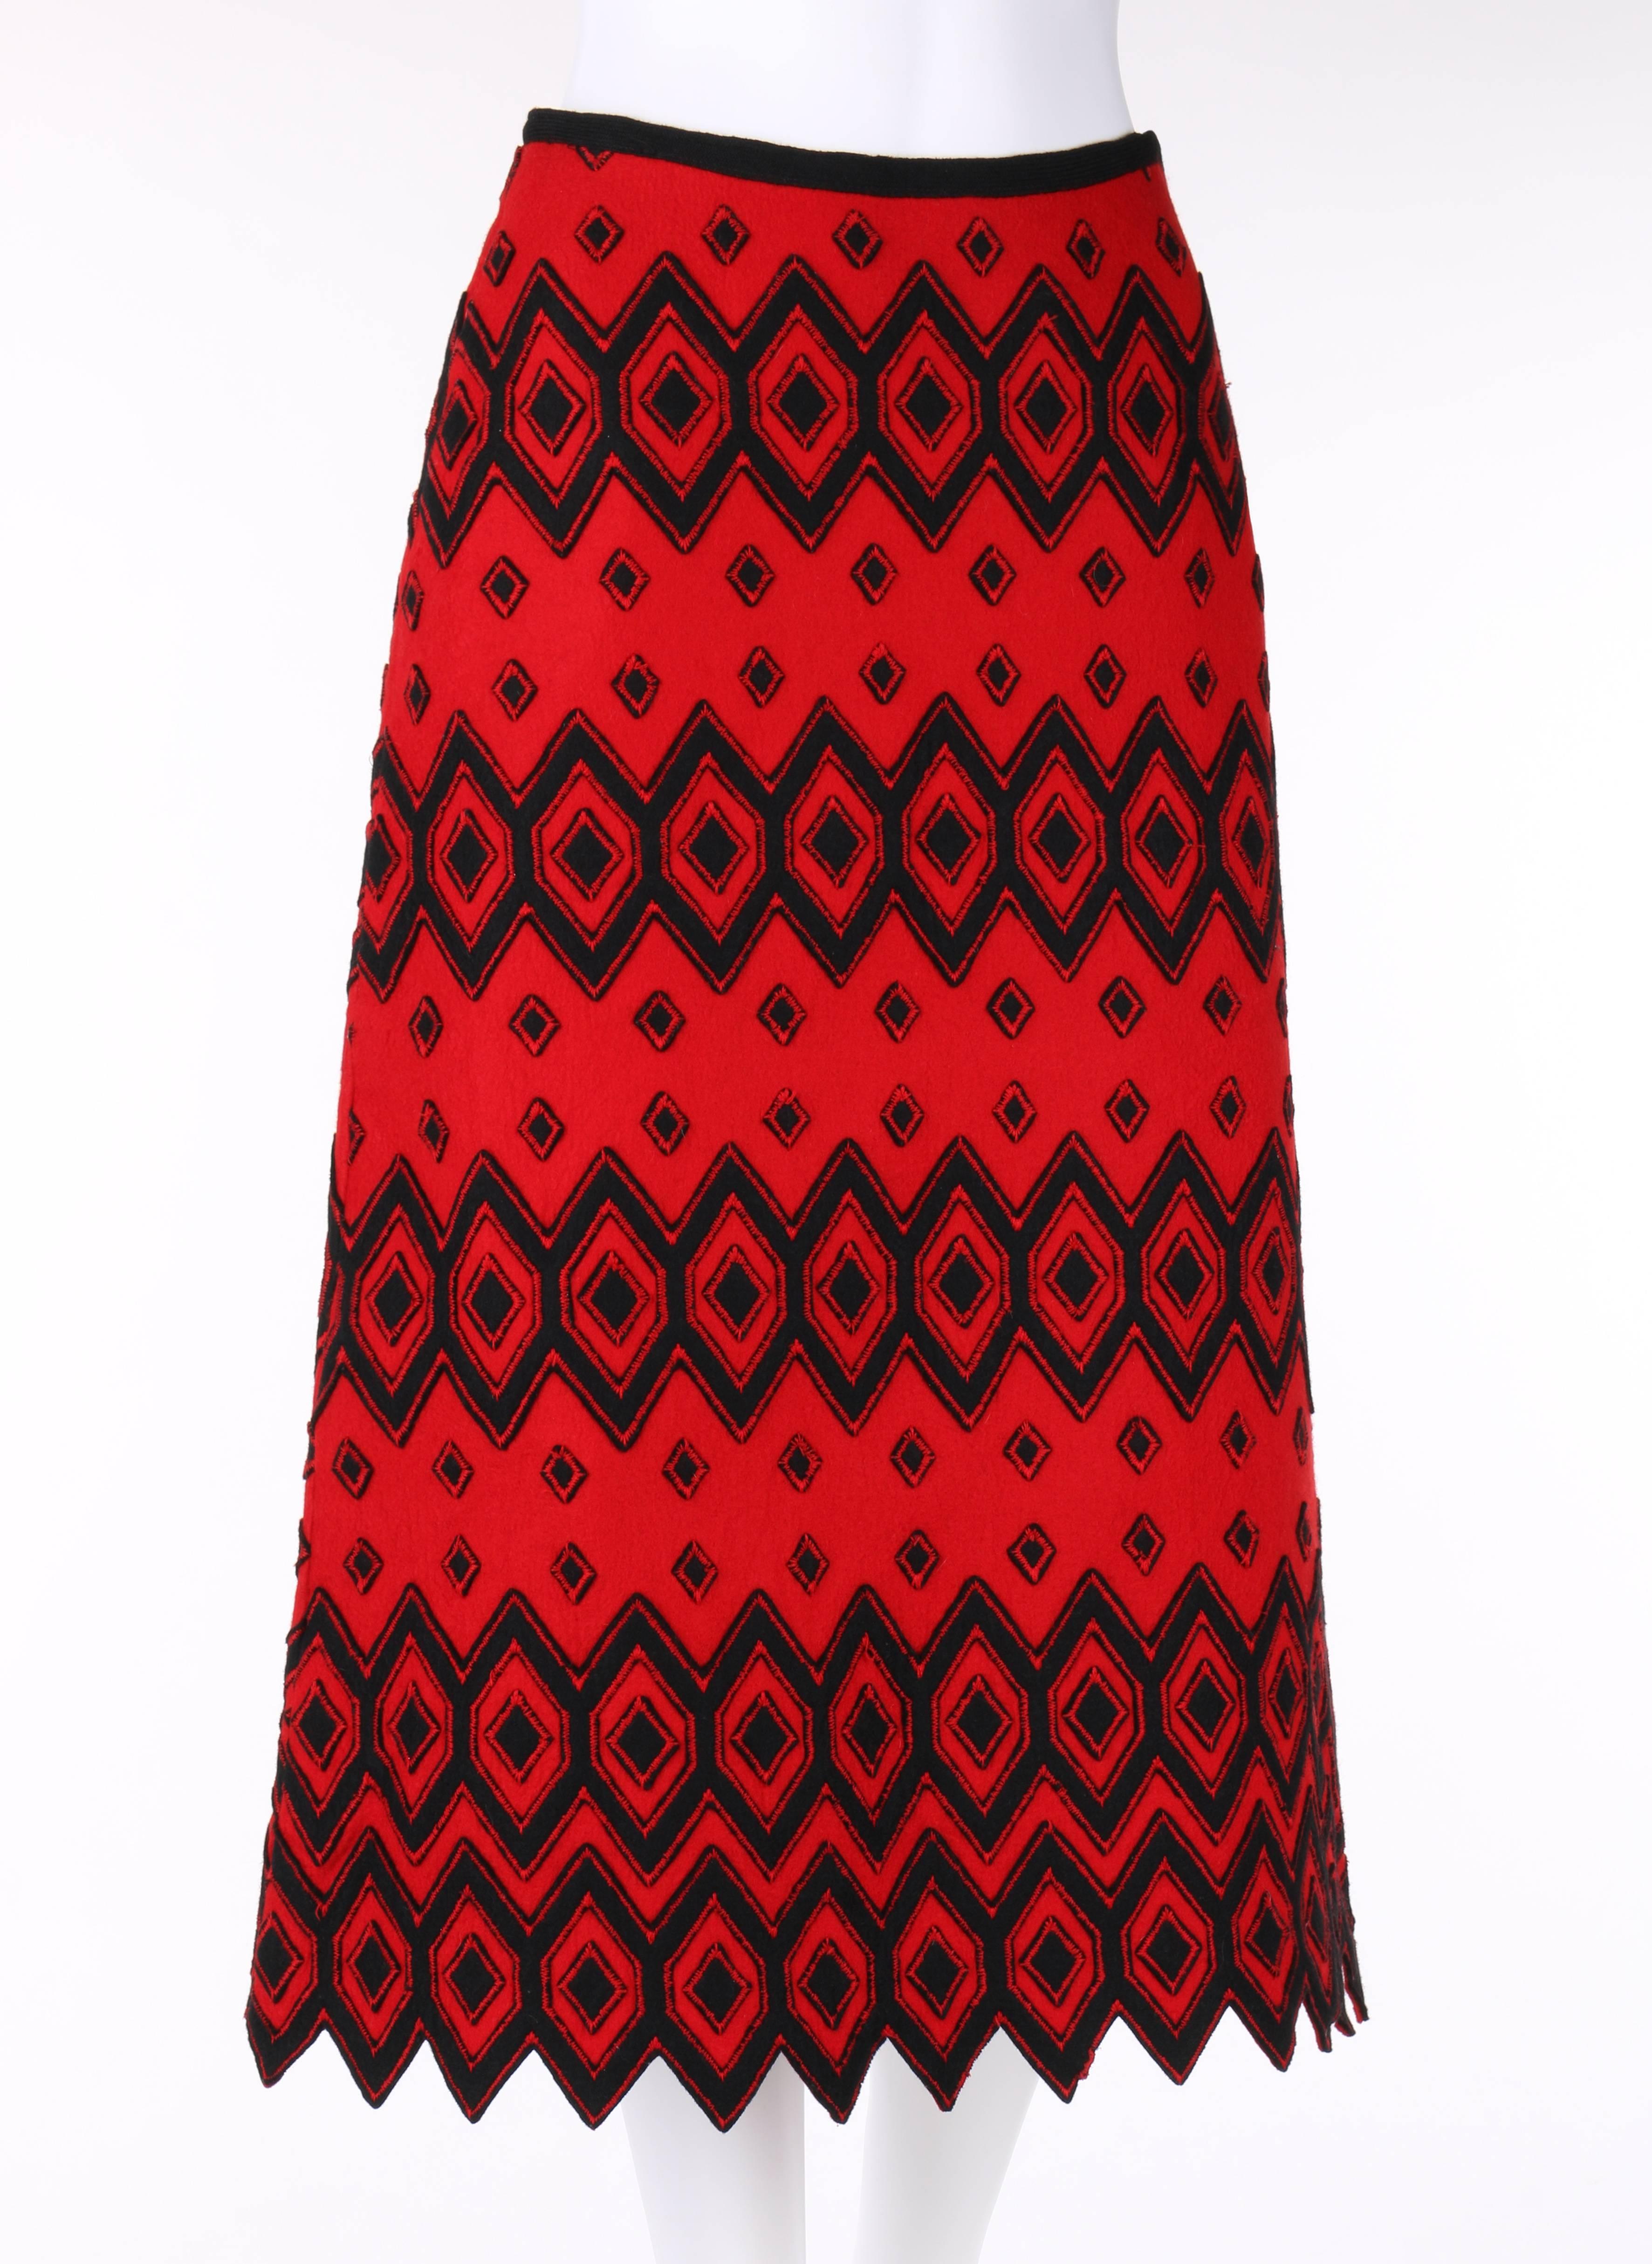 Vintage Anne Klein c.1970's (designed by Donna Karan) red & black wool felt a-line skirt. Black diamond pattern applique with red zigzag stitch detail. Shark tooth hemline. Left side seam zipper with hook and eye at top. Fully lined. Unmarked Fabric